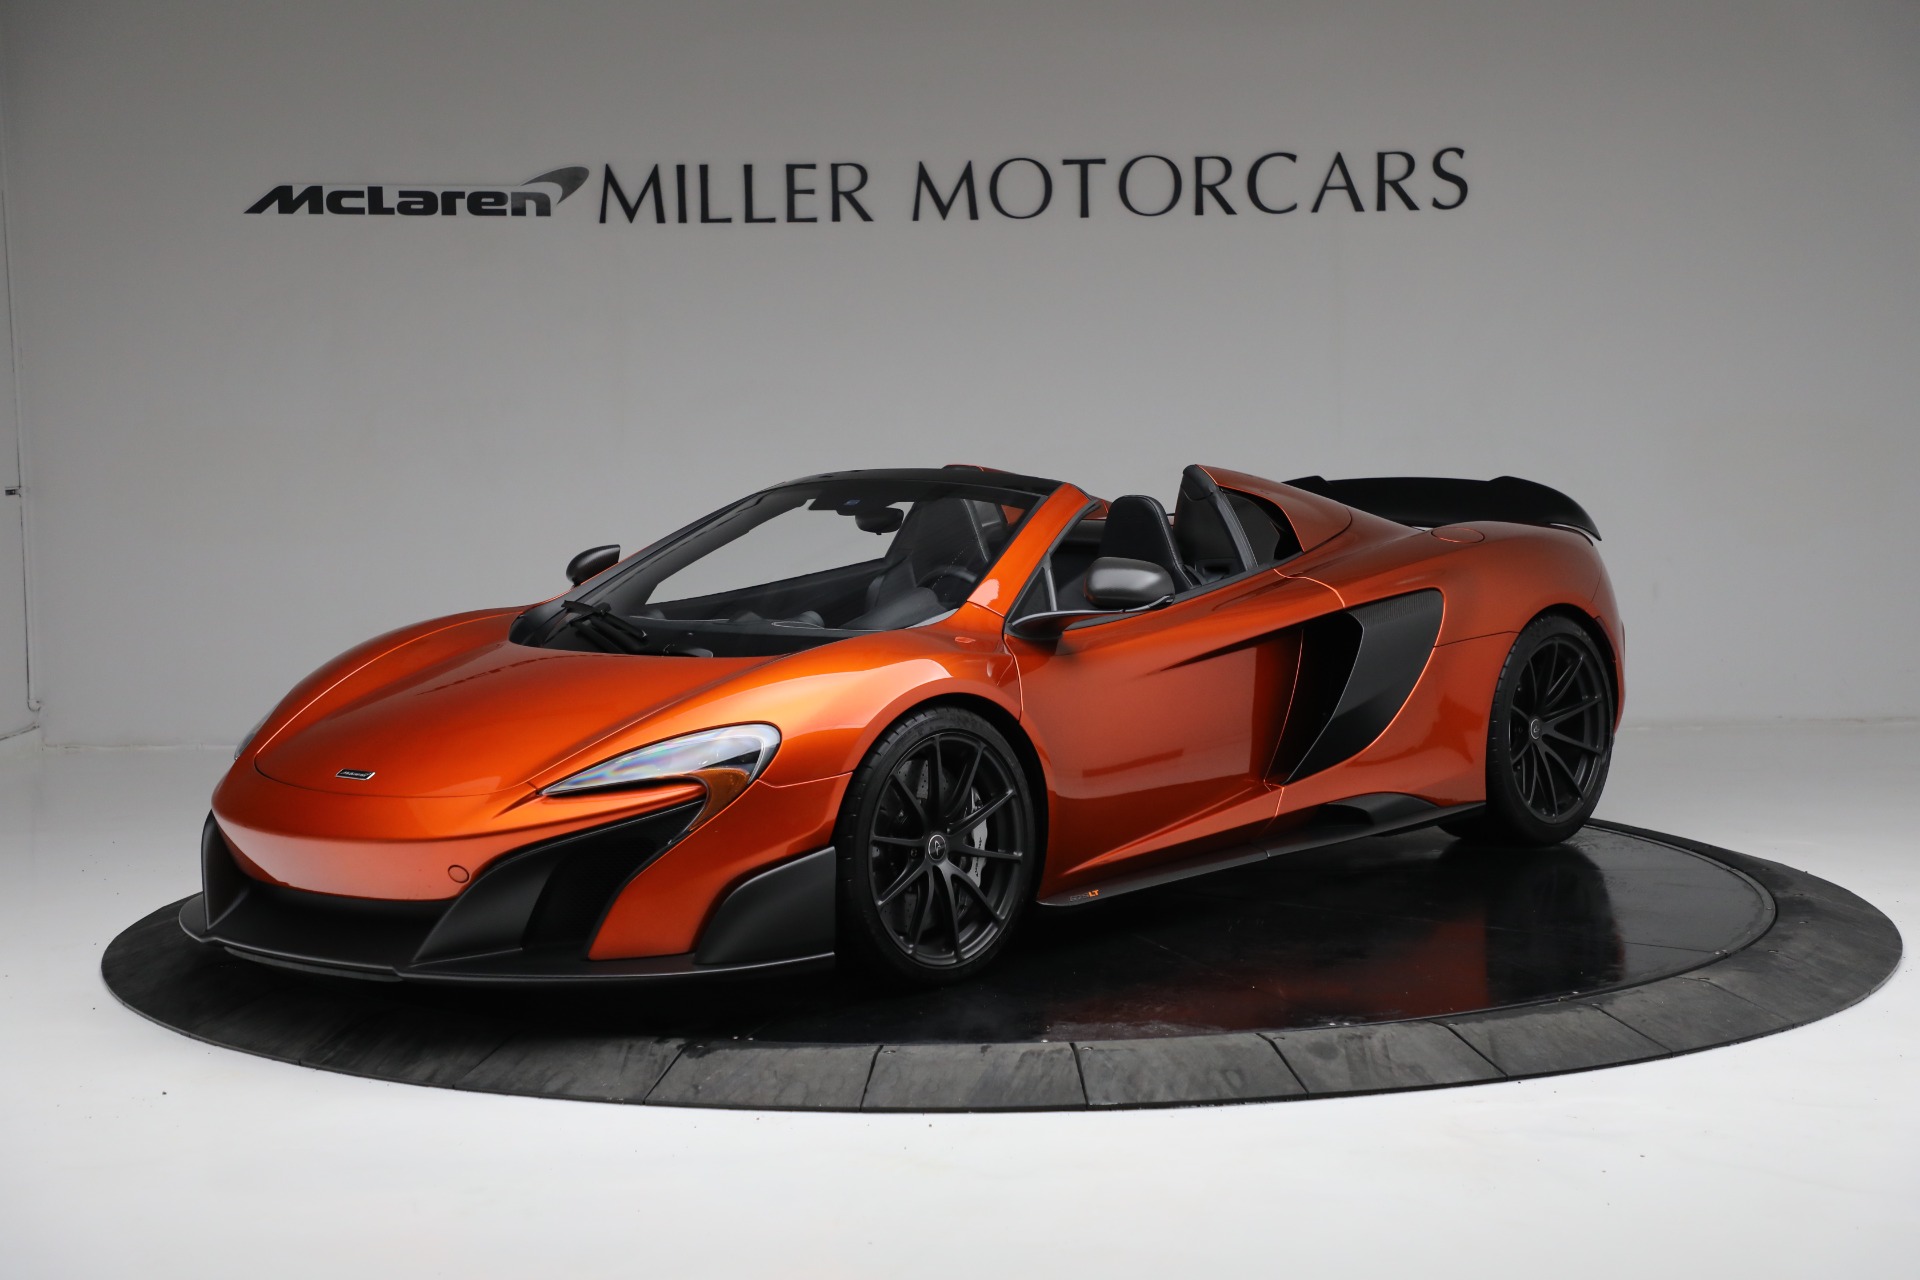 Used 2016 McLaren 675LT Spider for sale $275,900 at Aston Martin of Greenwich in Greenwich CT 06830 1